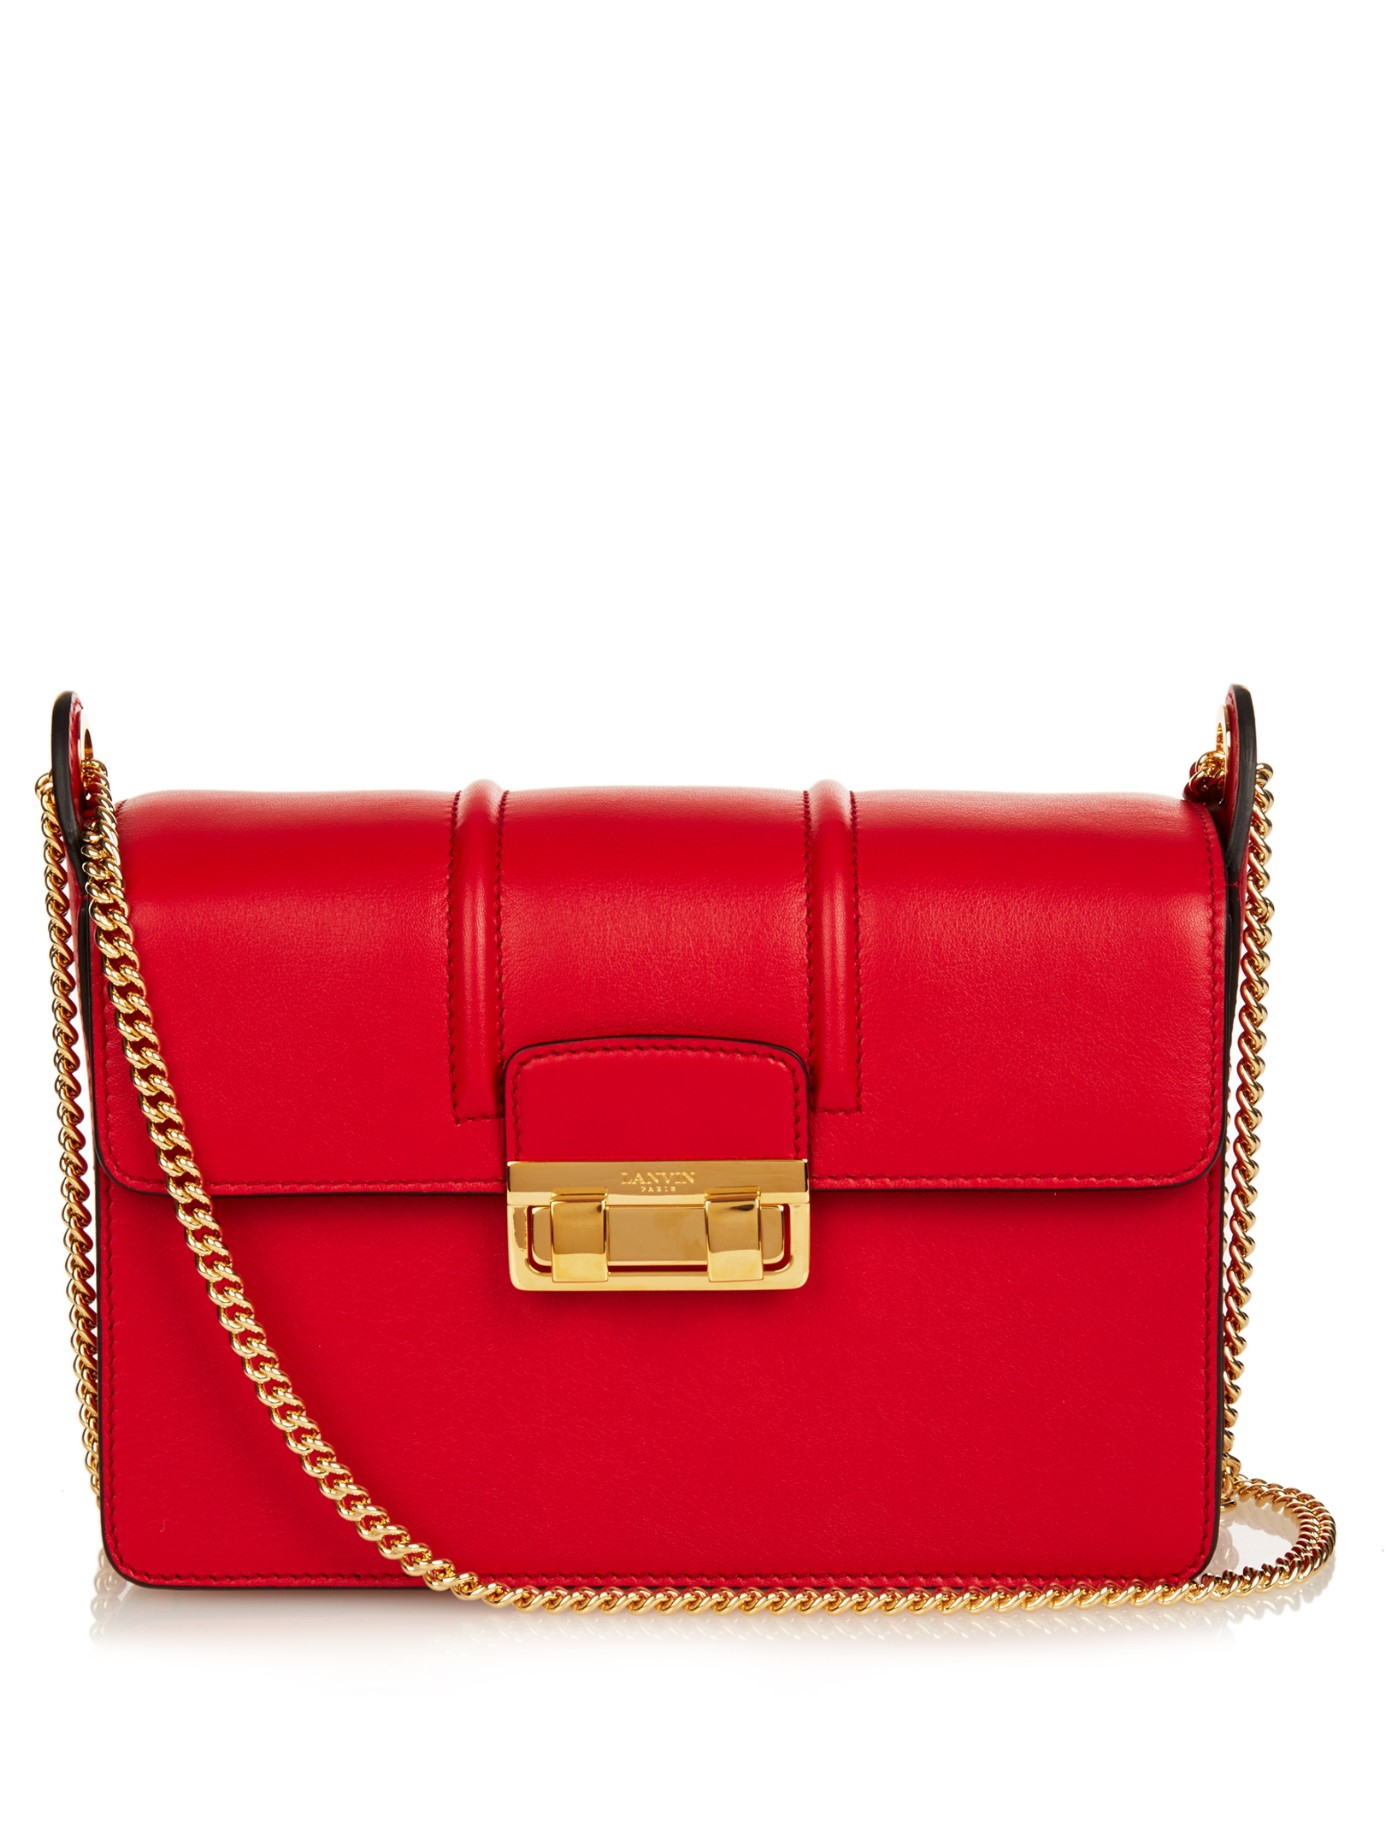 Lyst - Lanvin Jiji Small Leather Shoulder Bag in Red